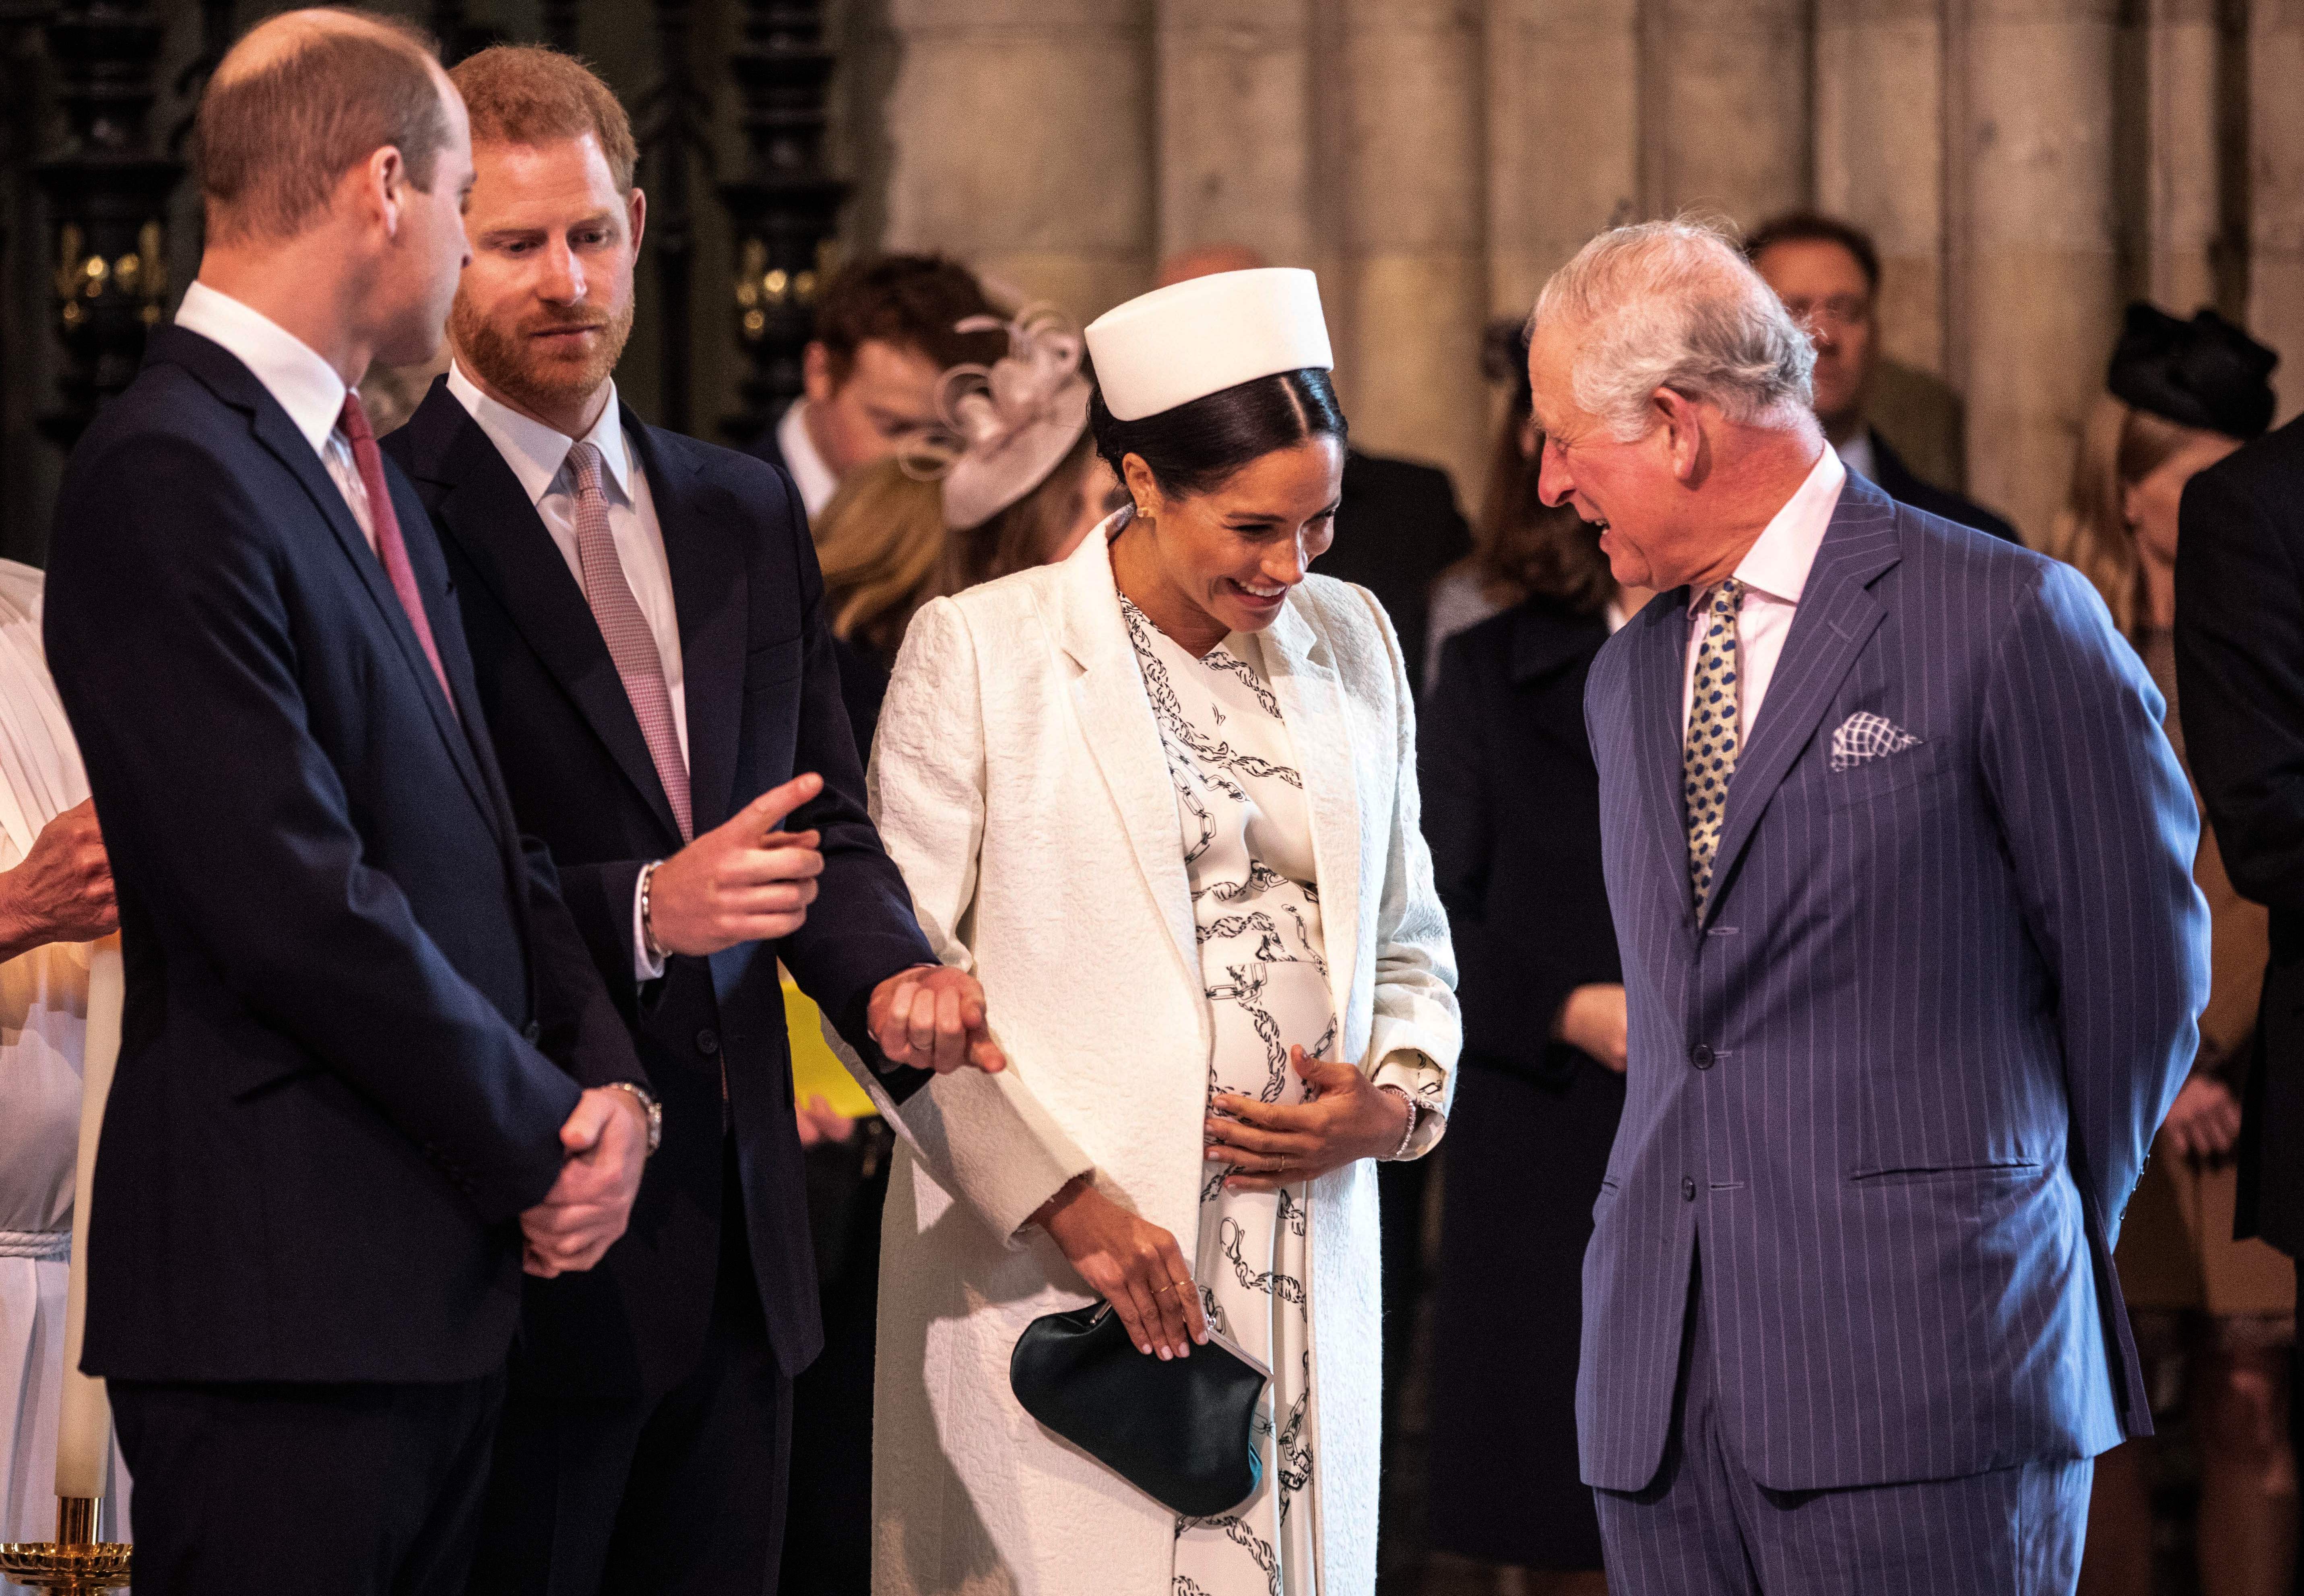 Meghan Markle pictured laughing with Prince Charles as Prince William engages with his brother Prince Harry during the Commonwealth Day service at Westminster Abbey on March 11, 2019 in London. / Source: Getty Images